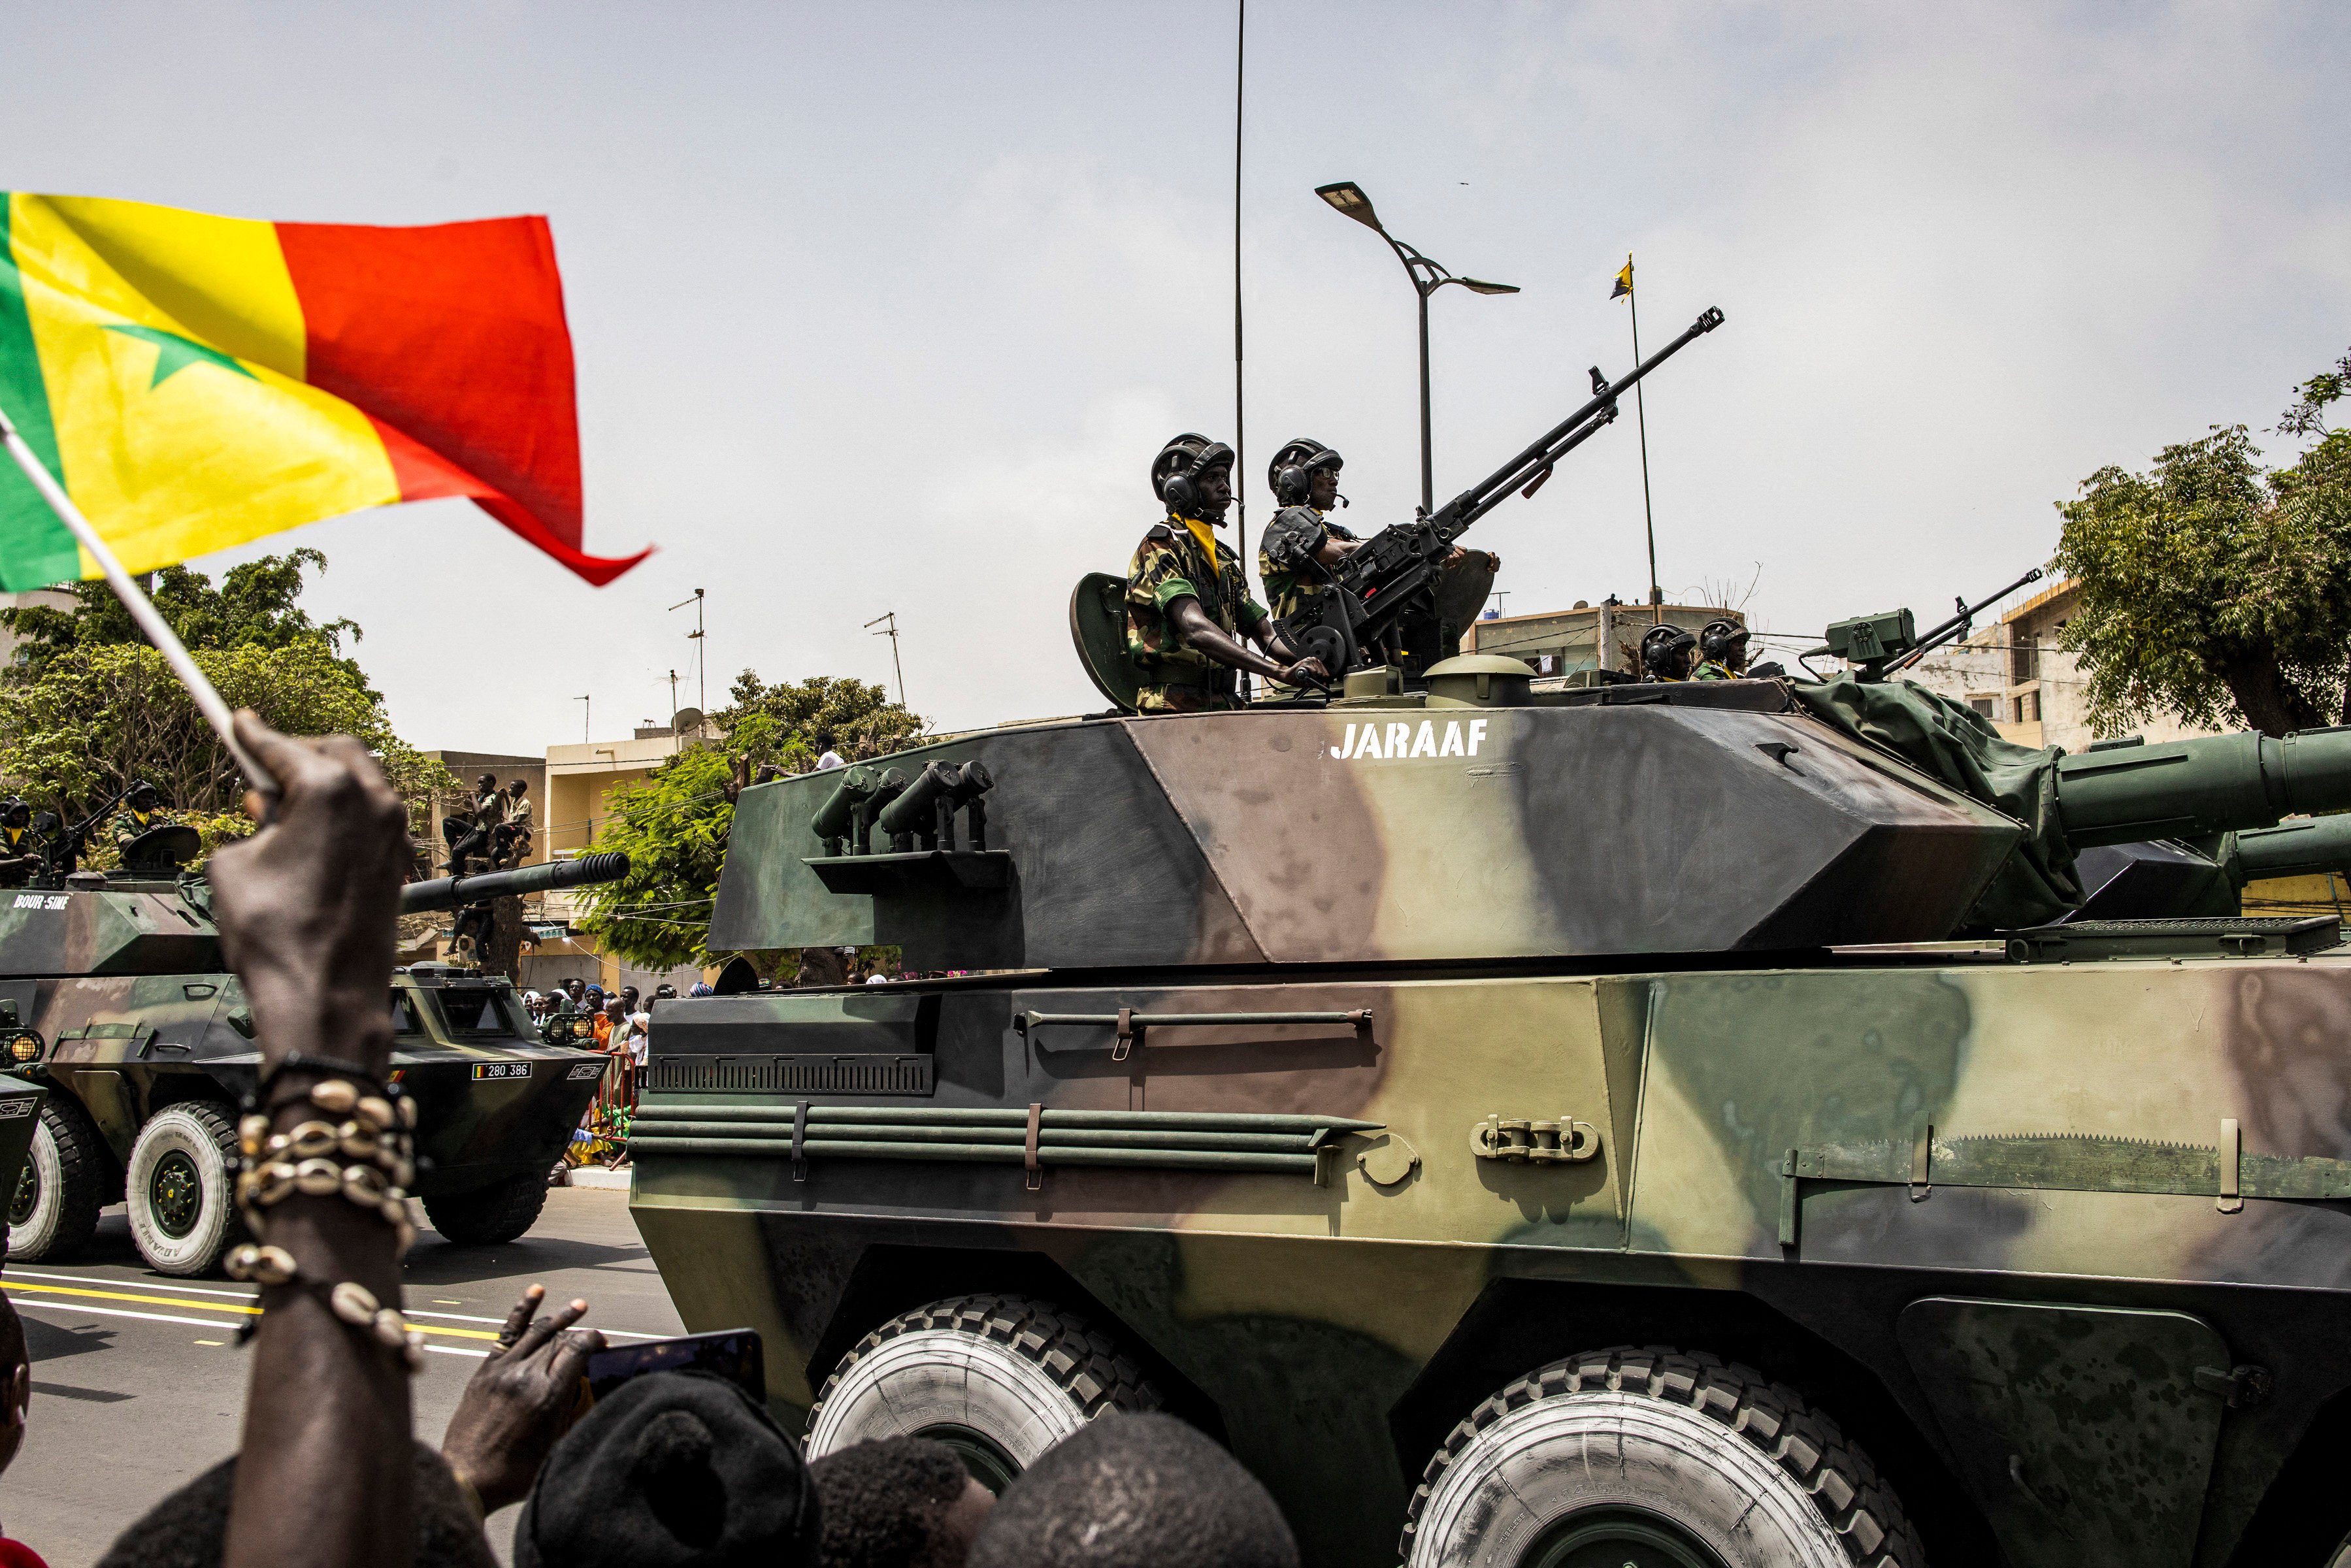 Chinese arms supplier Norinco has opened a new sales office in Senegal, expanding its influence in West Africa. Photo: AFP